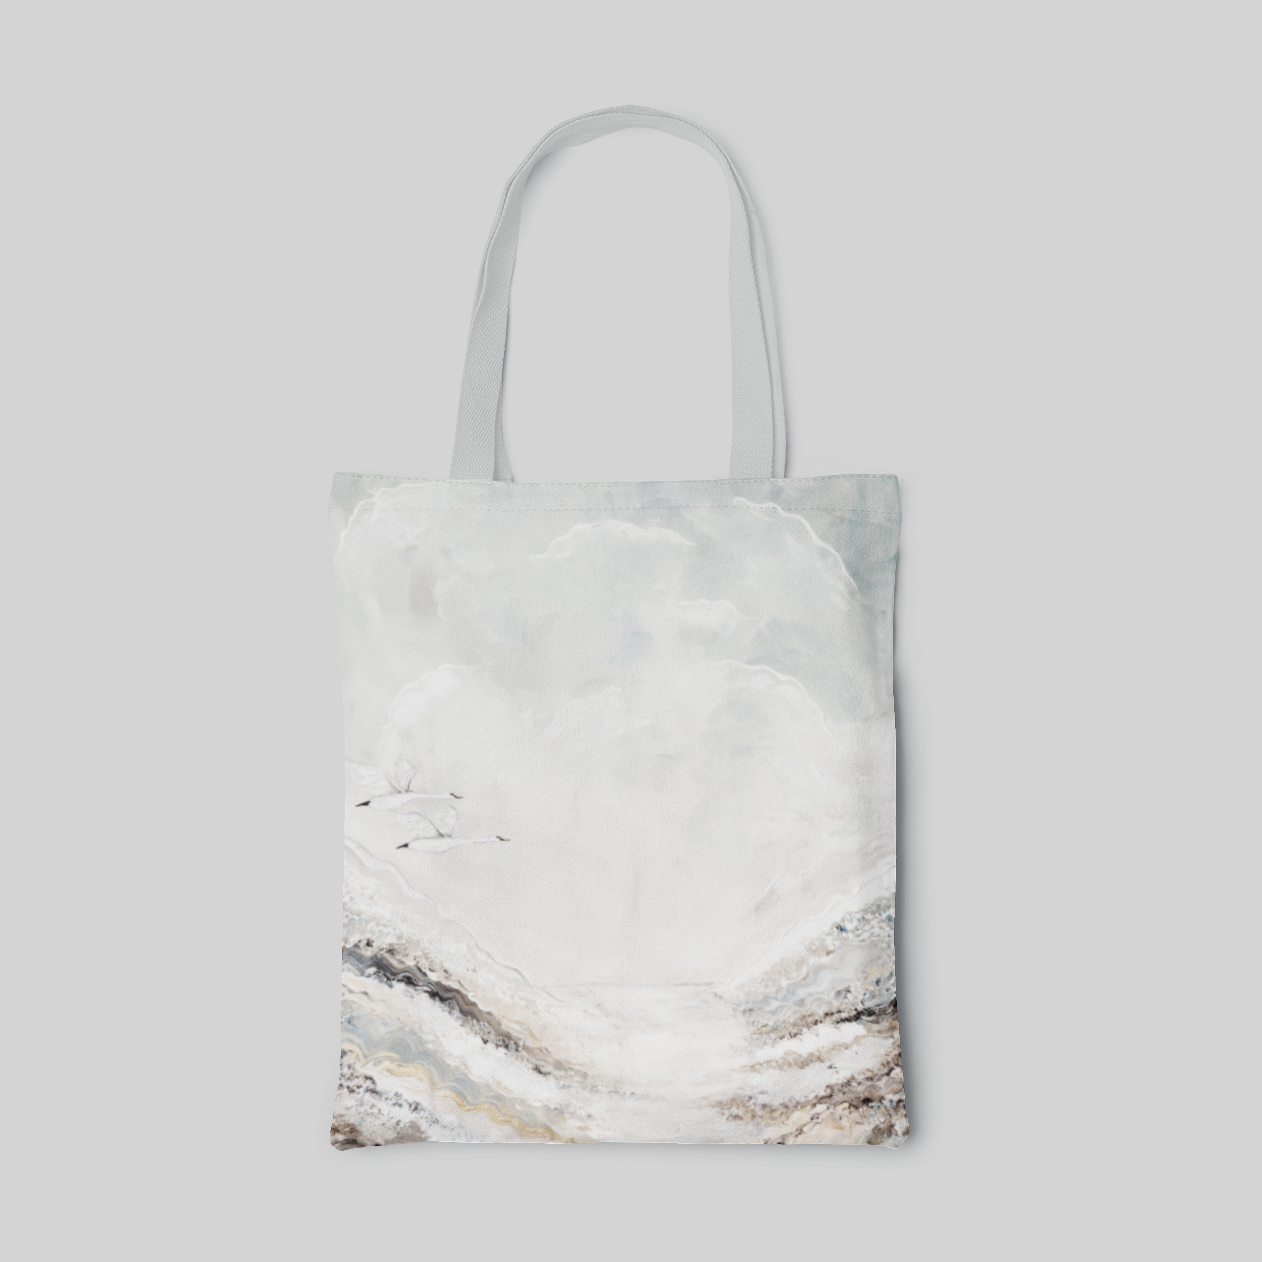 grey abstract designed tote bag with a pair swans flying in the sky, front side